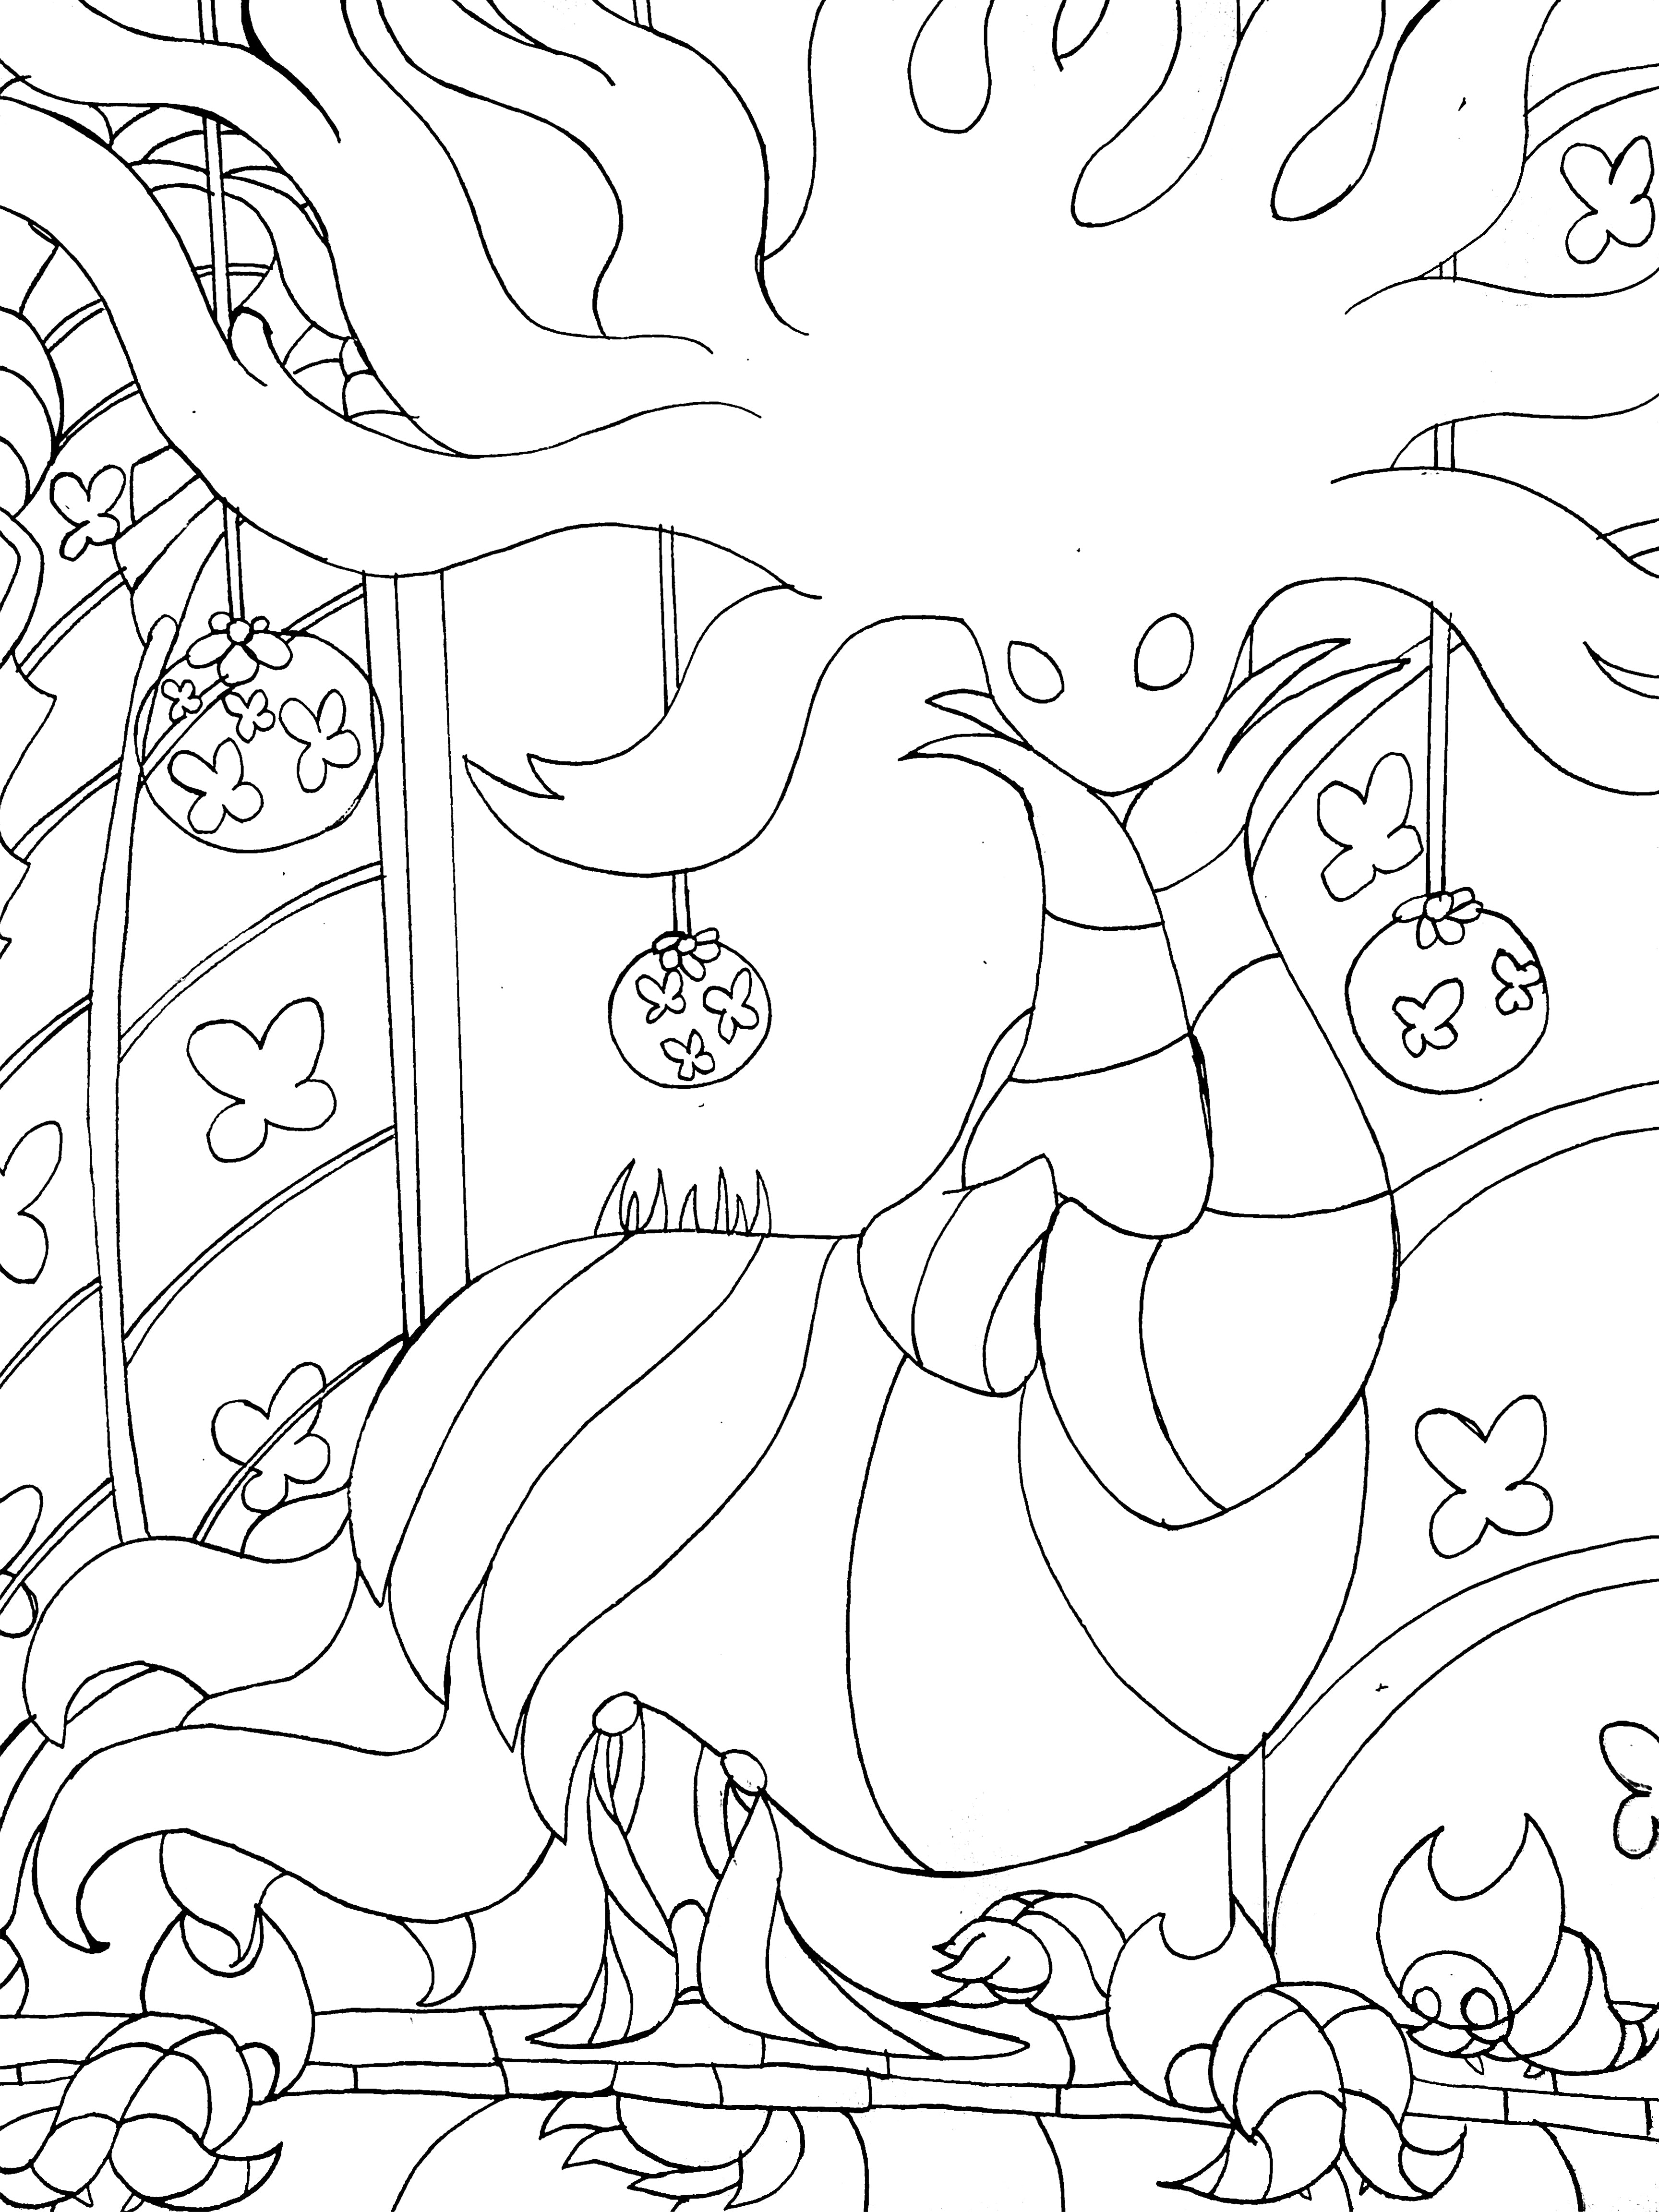 artsy sister, the hollow knight lineart, hollow knight parody lineart